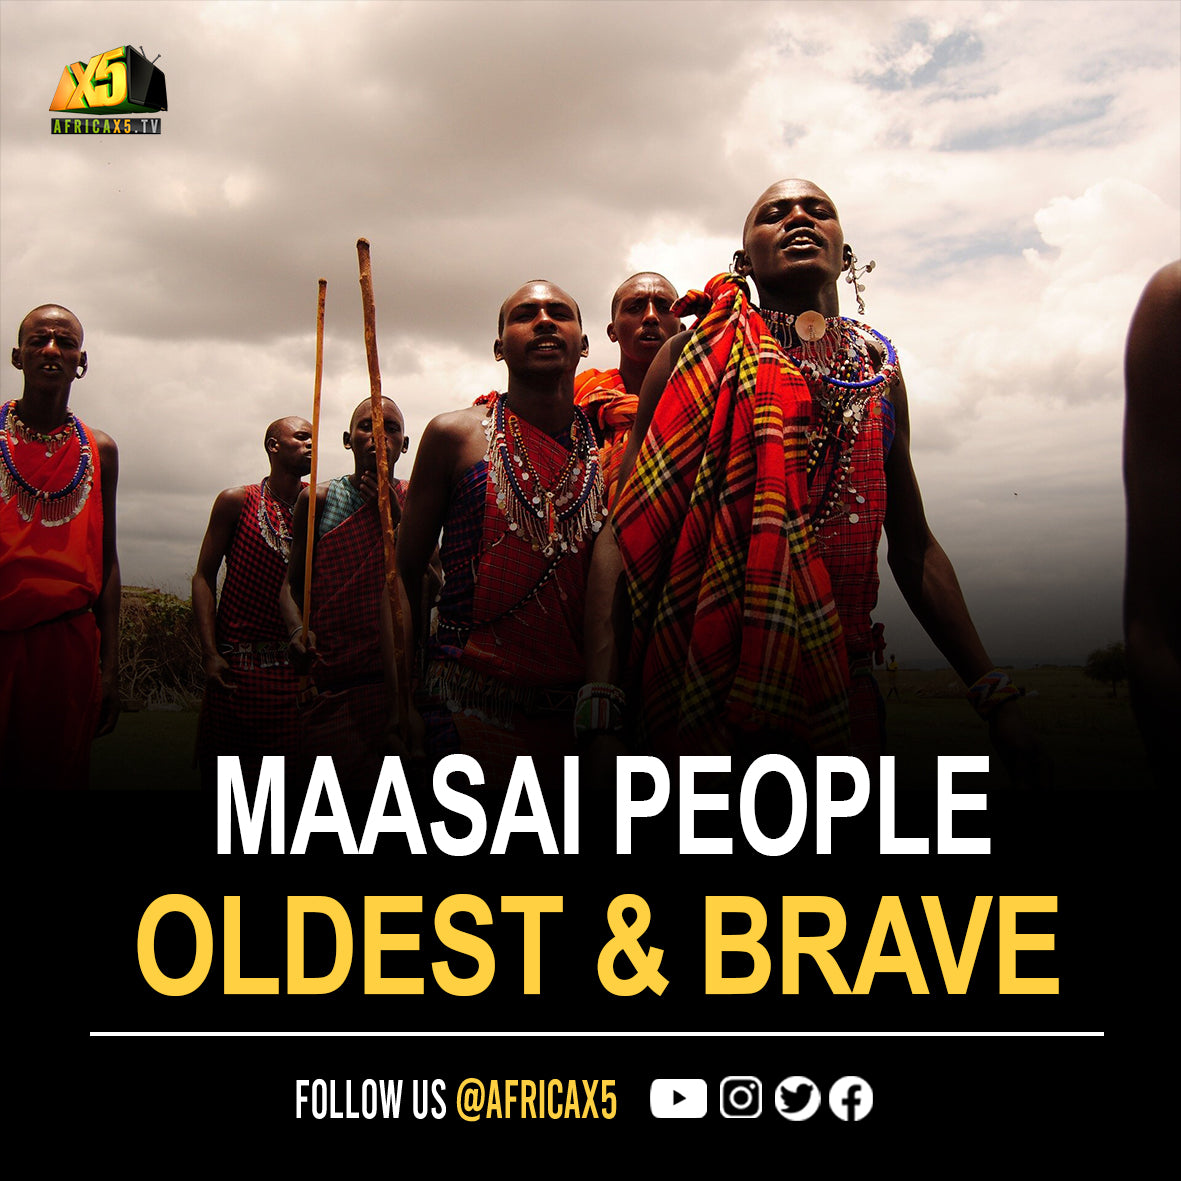 The Maasai people, one of the oldest & brave Ancient African tribes